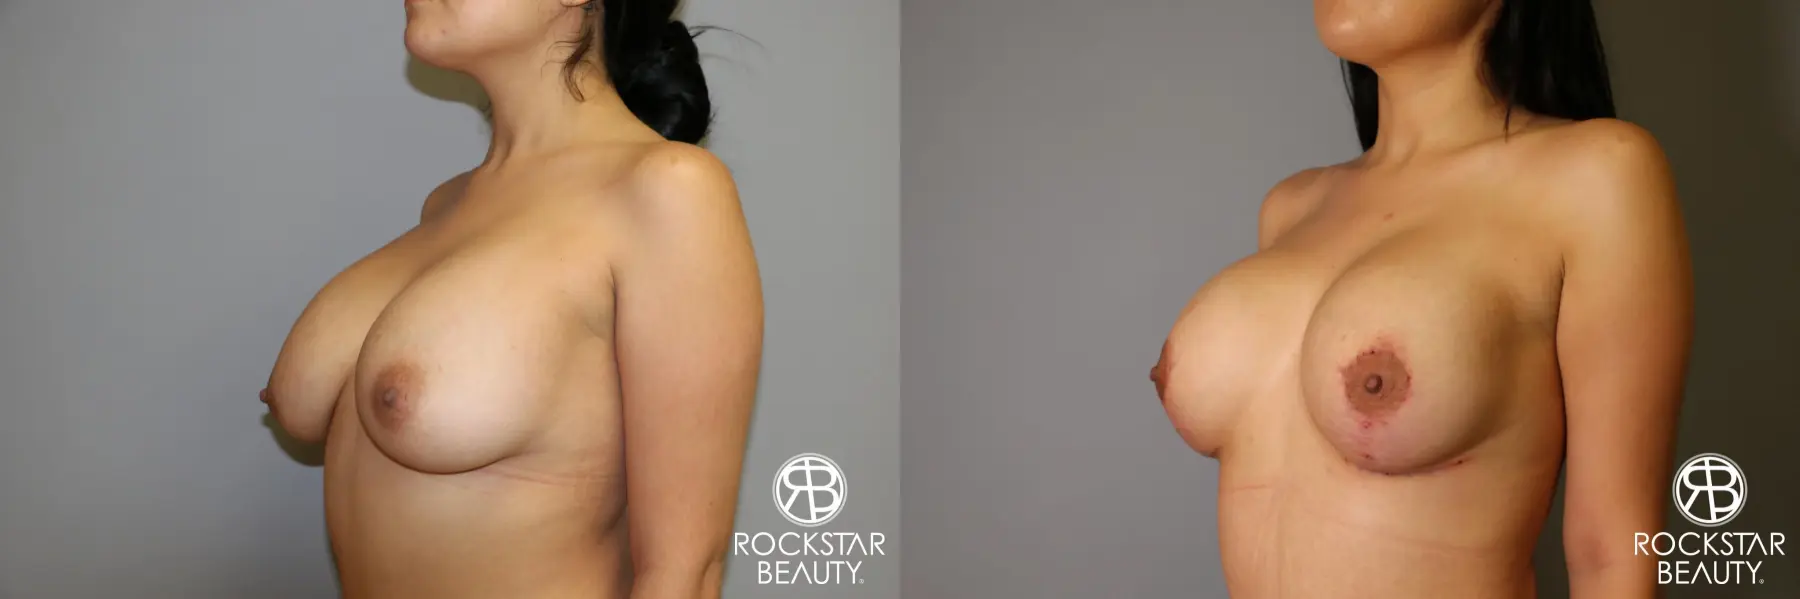 Breast Lift And Augmentation: Patient 1 - Before and After 2